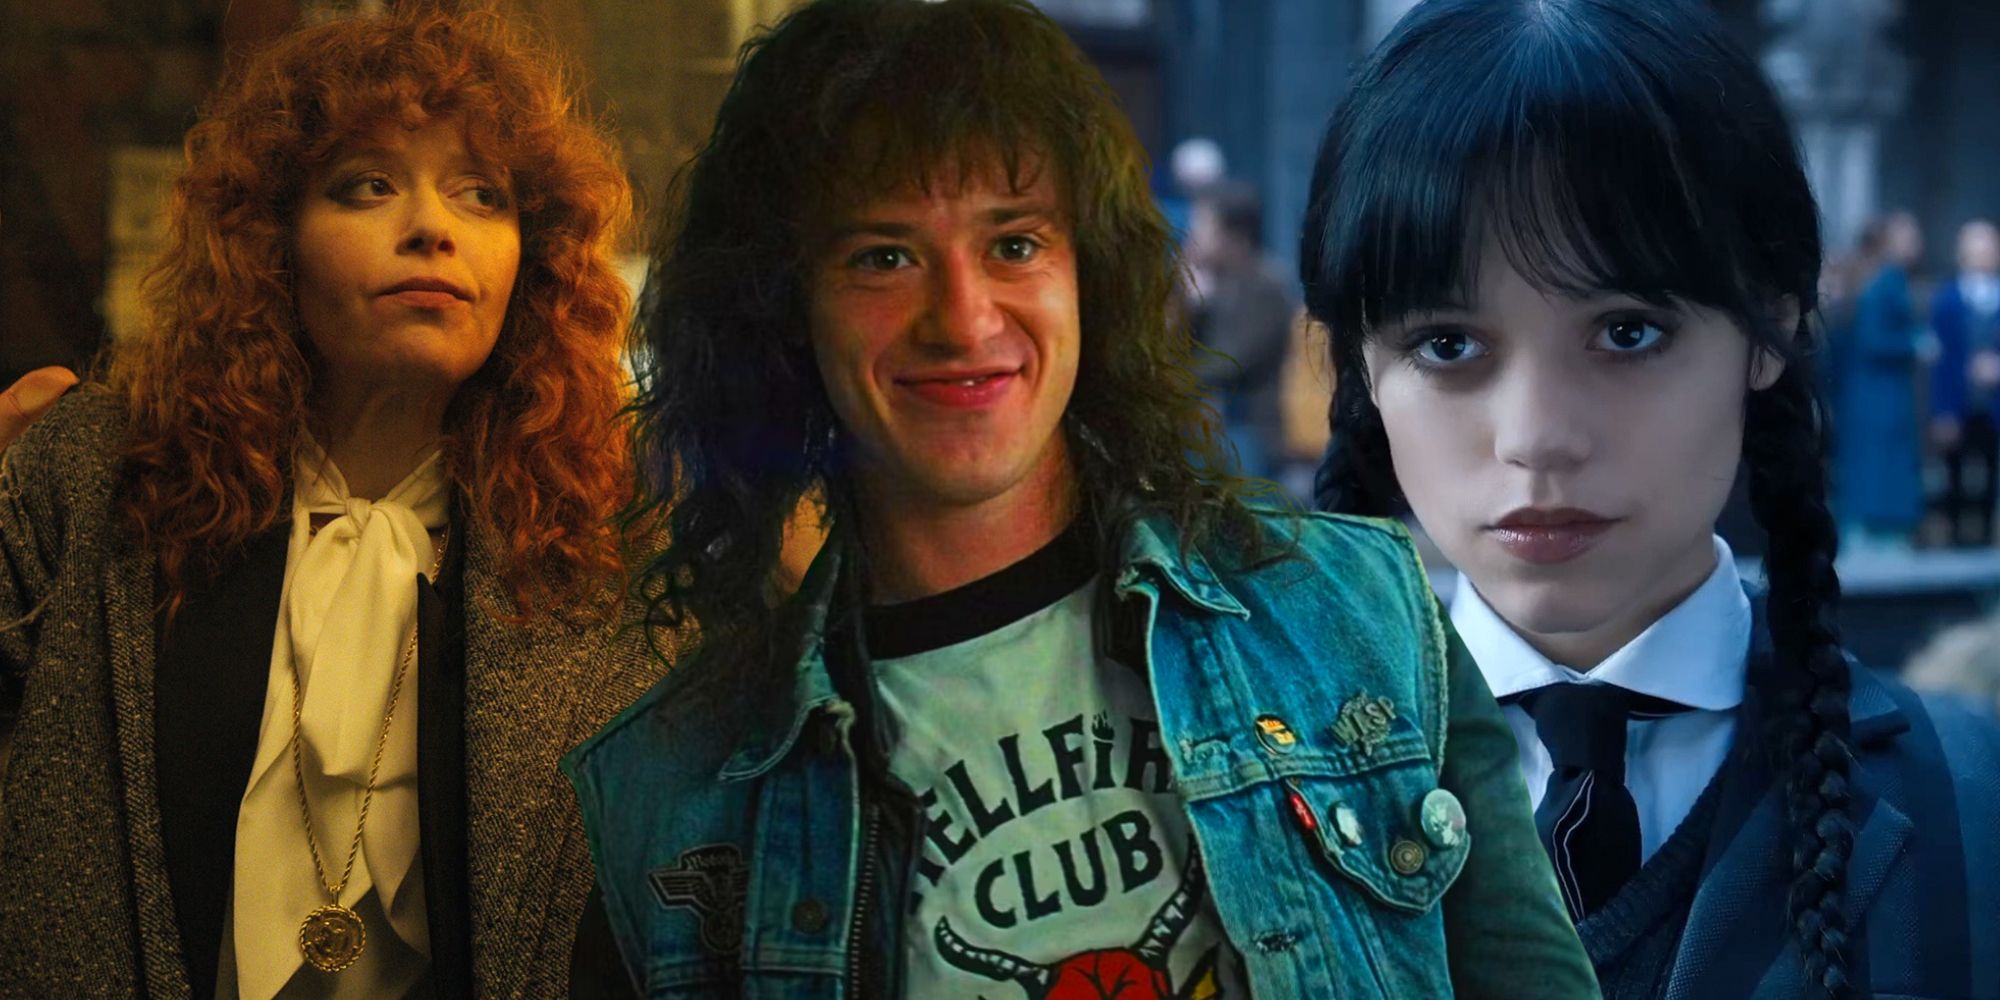 Netflix Shows Russian Doll, Stranger Things, Wednesday